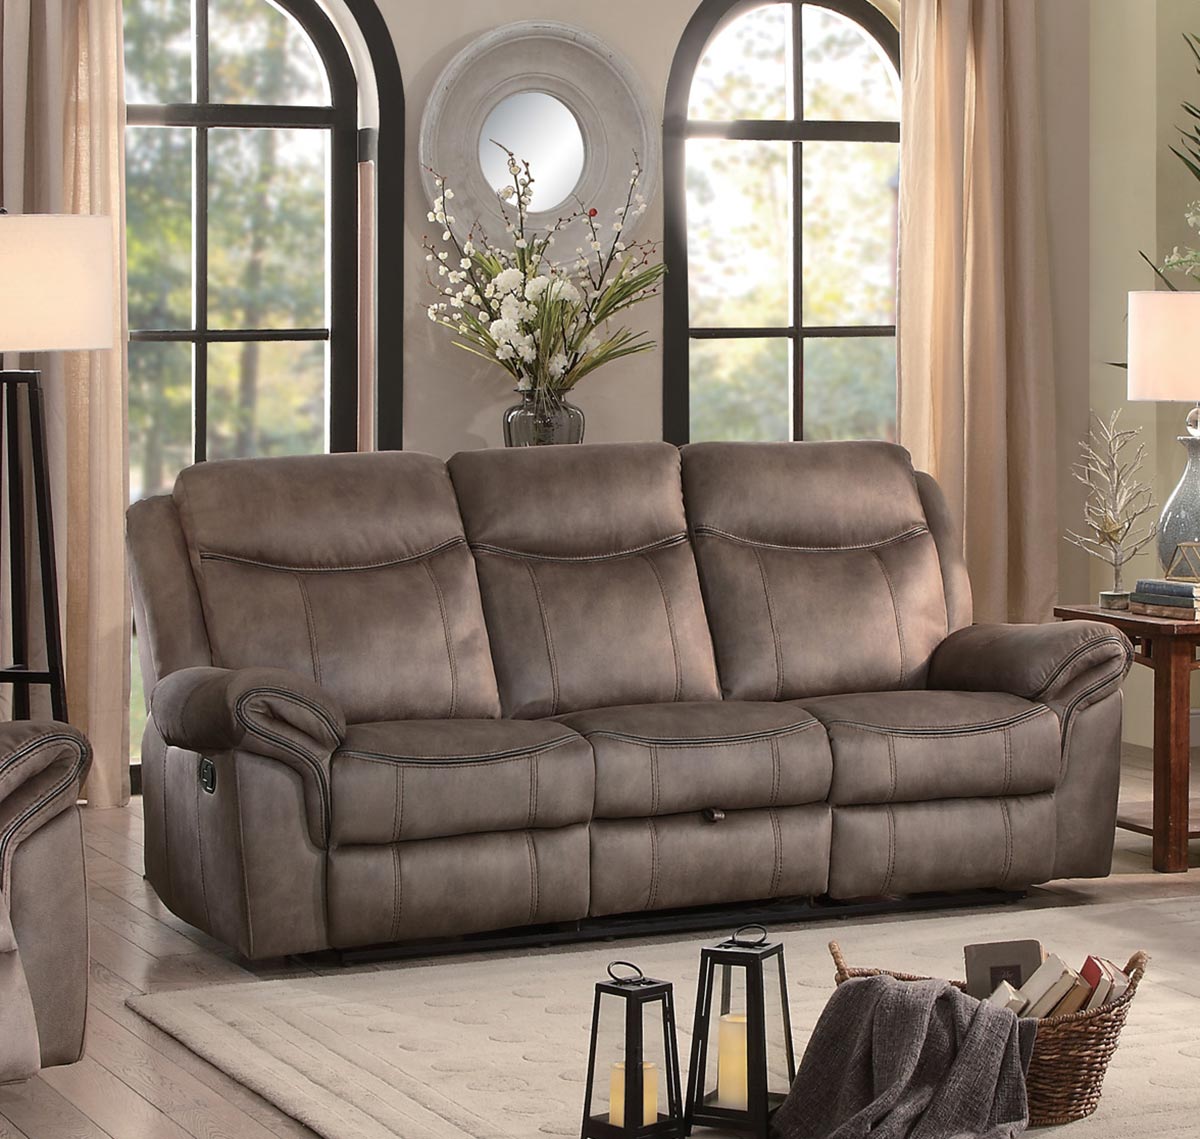 Picture of Home Elegance 8206NF-3 40.25 x 40.25 x 86.5 in. Aram Double Reclining Sofa with Cup Holders & Receptacles - Brown